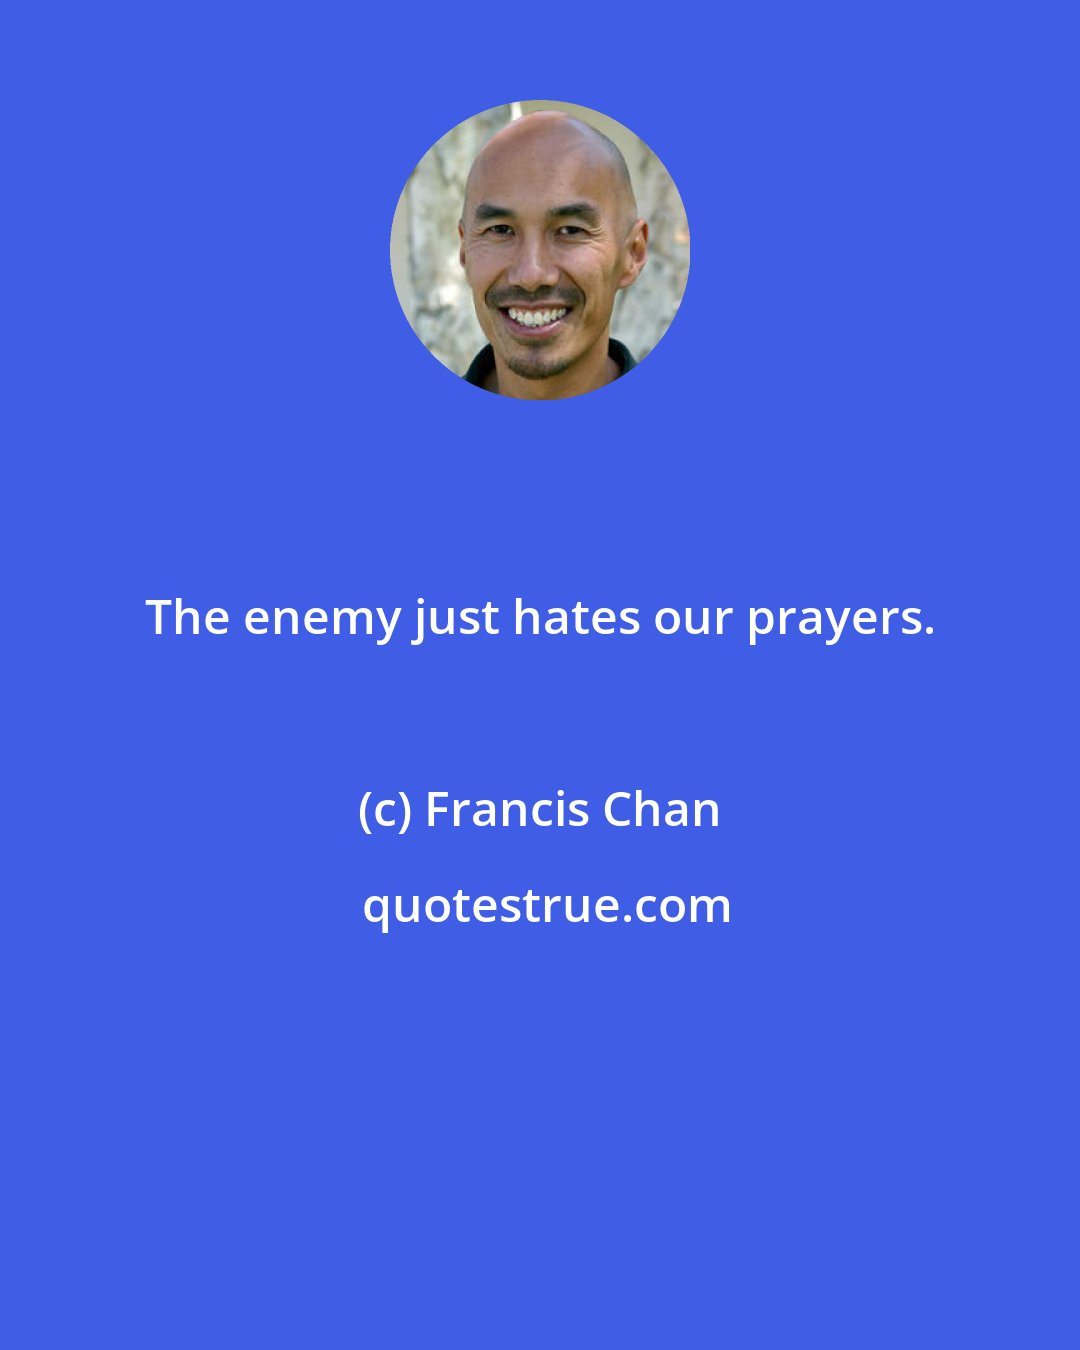 Francis Chan: The enemy just hates our prayers.